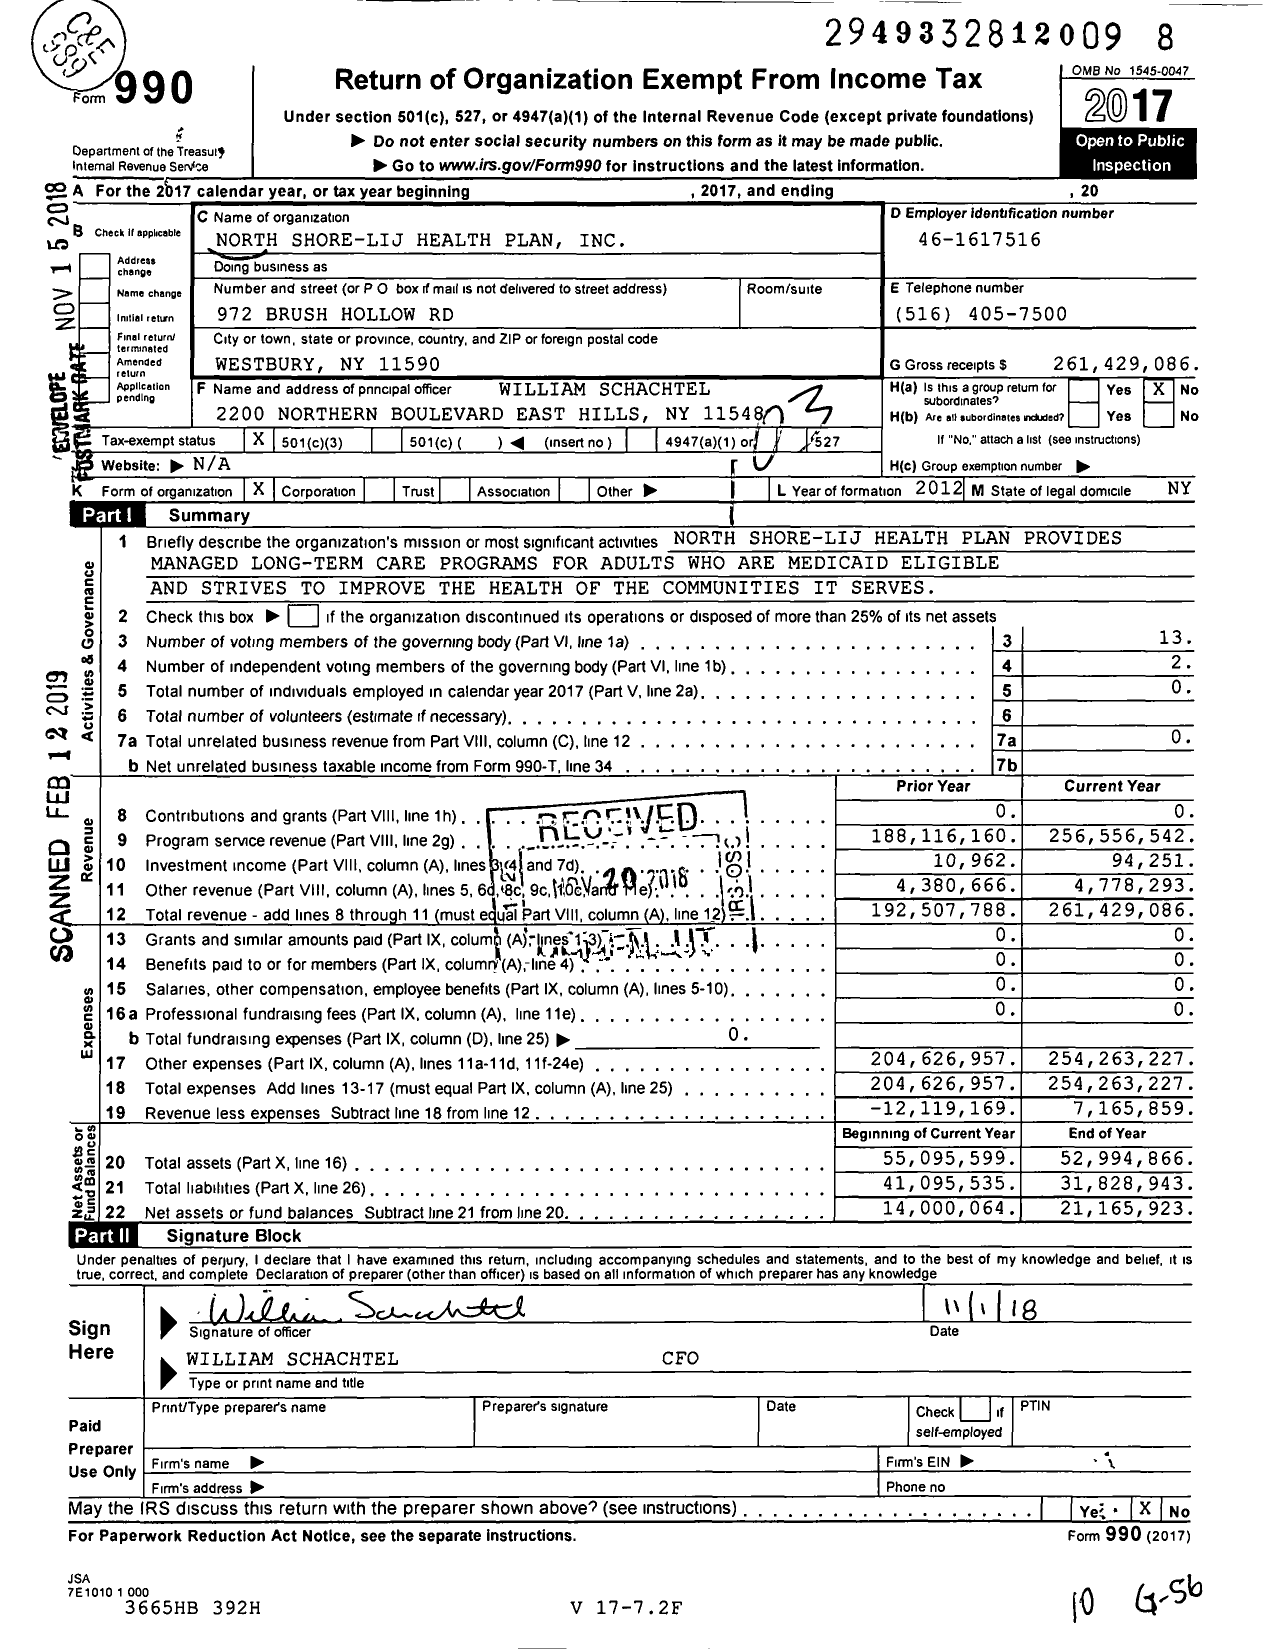 Image of first page of 2017 Form 990 for North Shore-Lij Health Plan